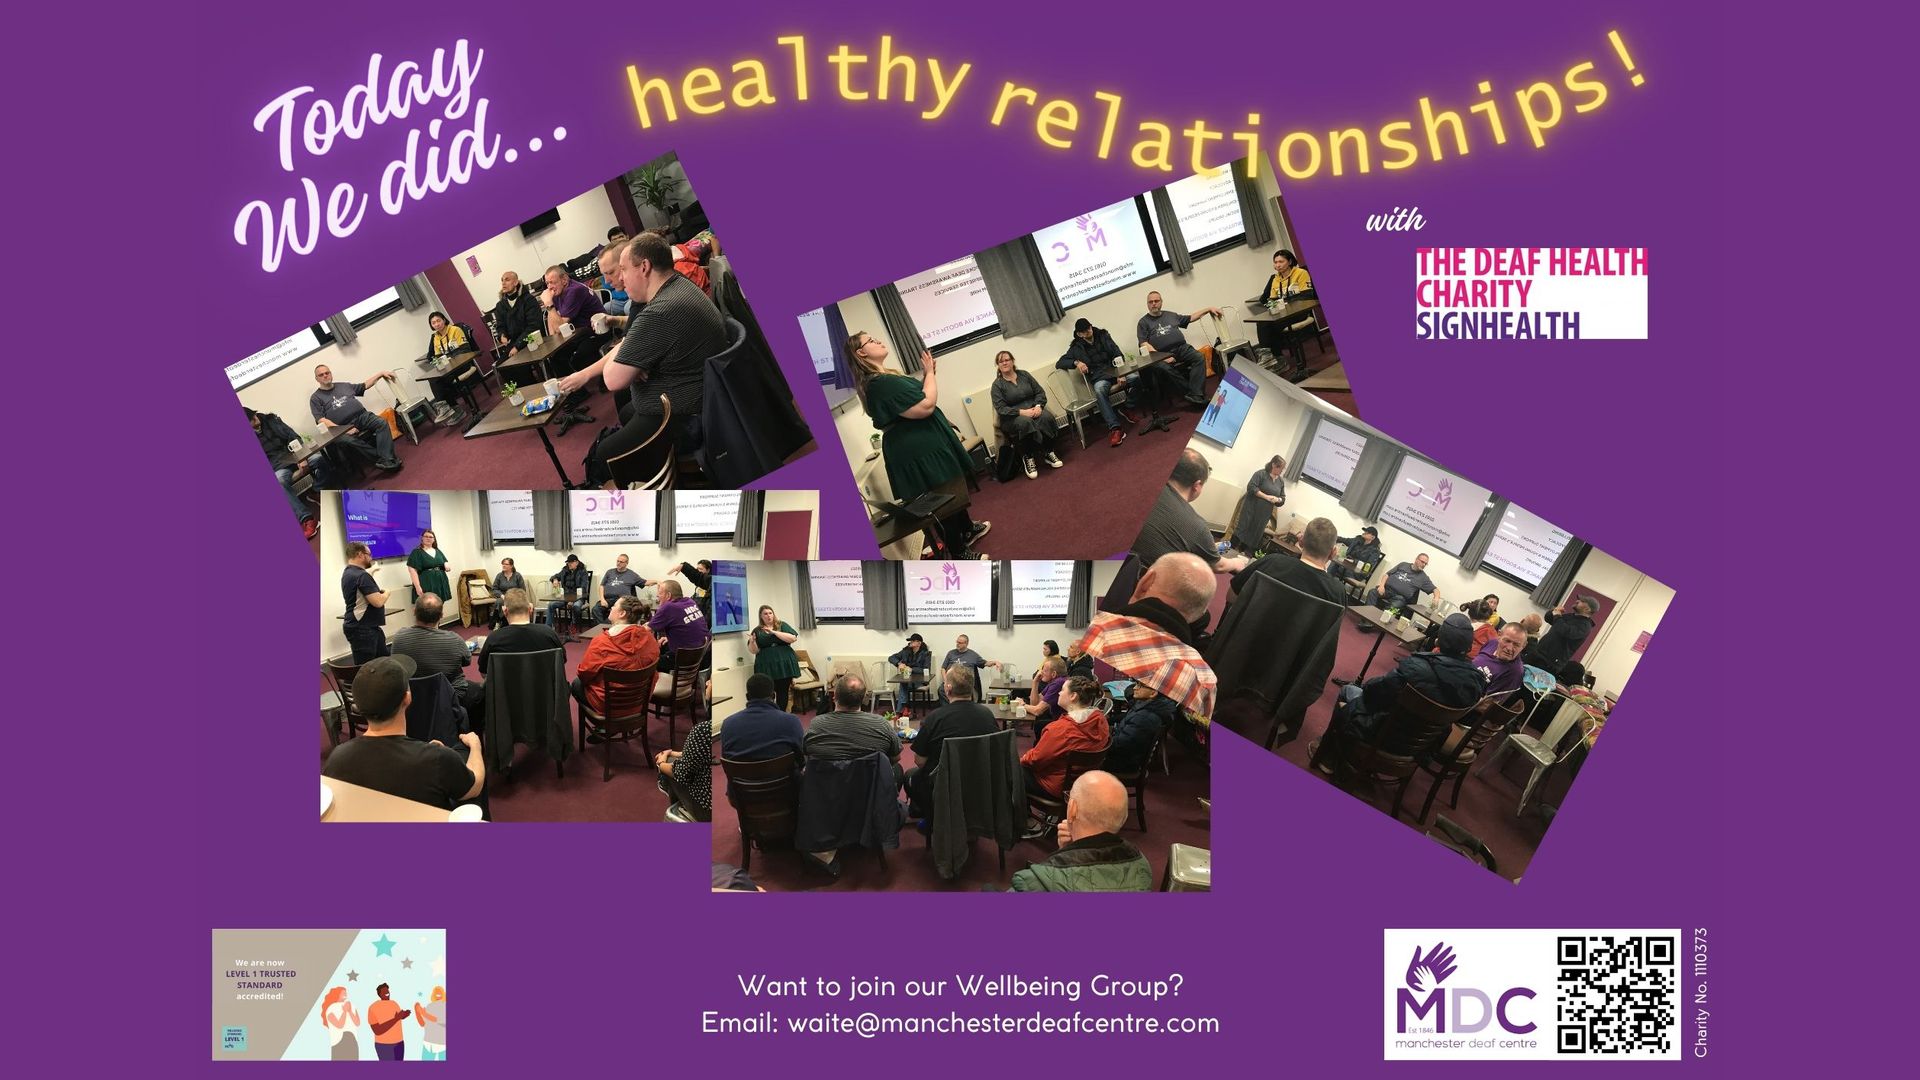 Promotion poster showing images from today's presentaion to our wellbeing group by SignHealth staff.